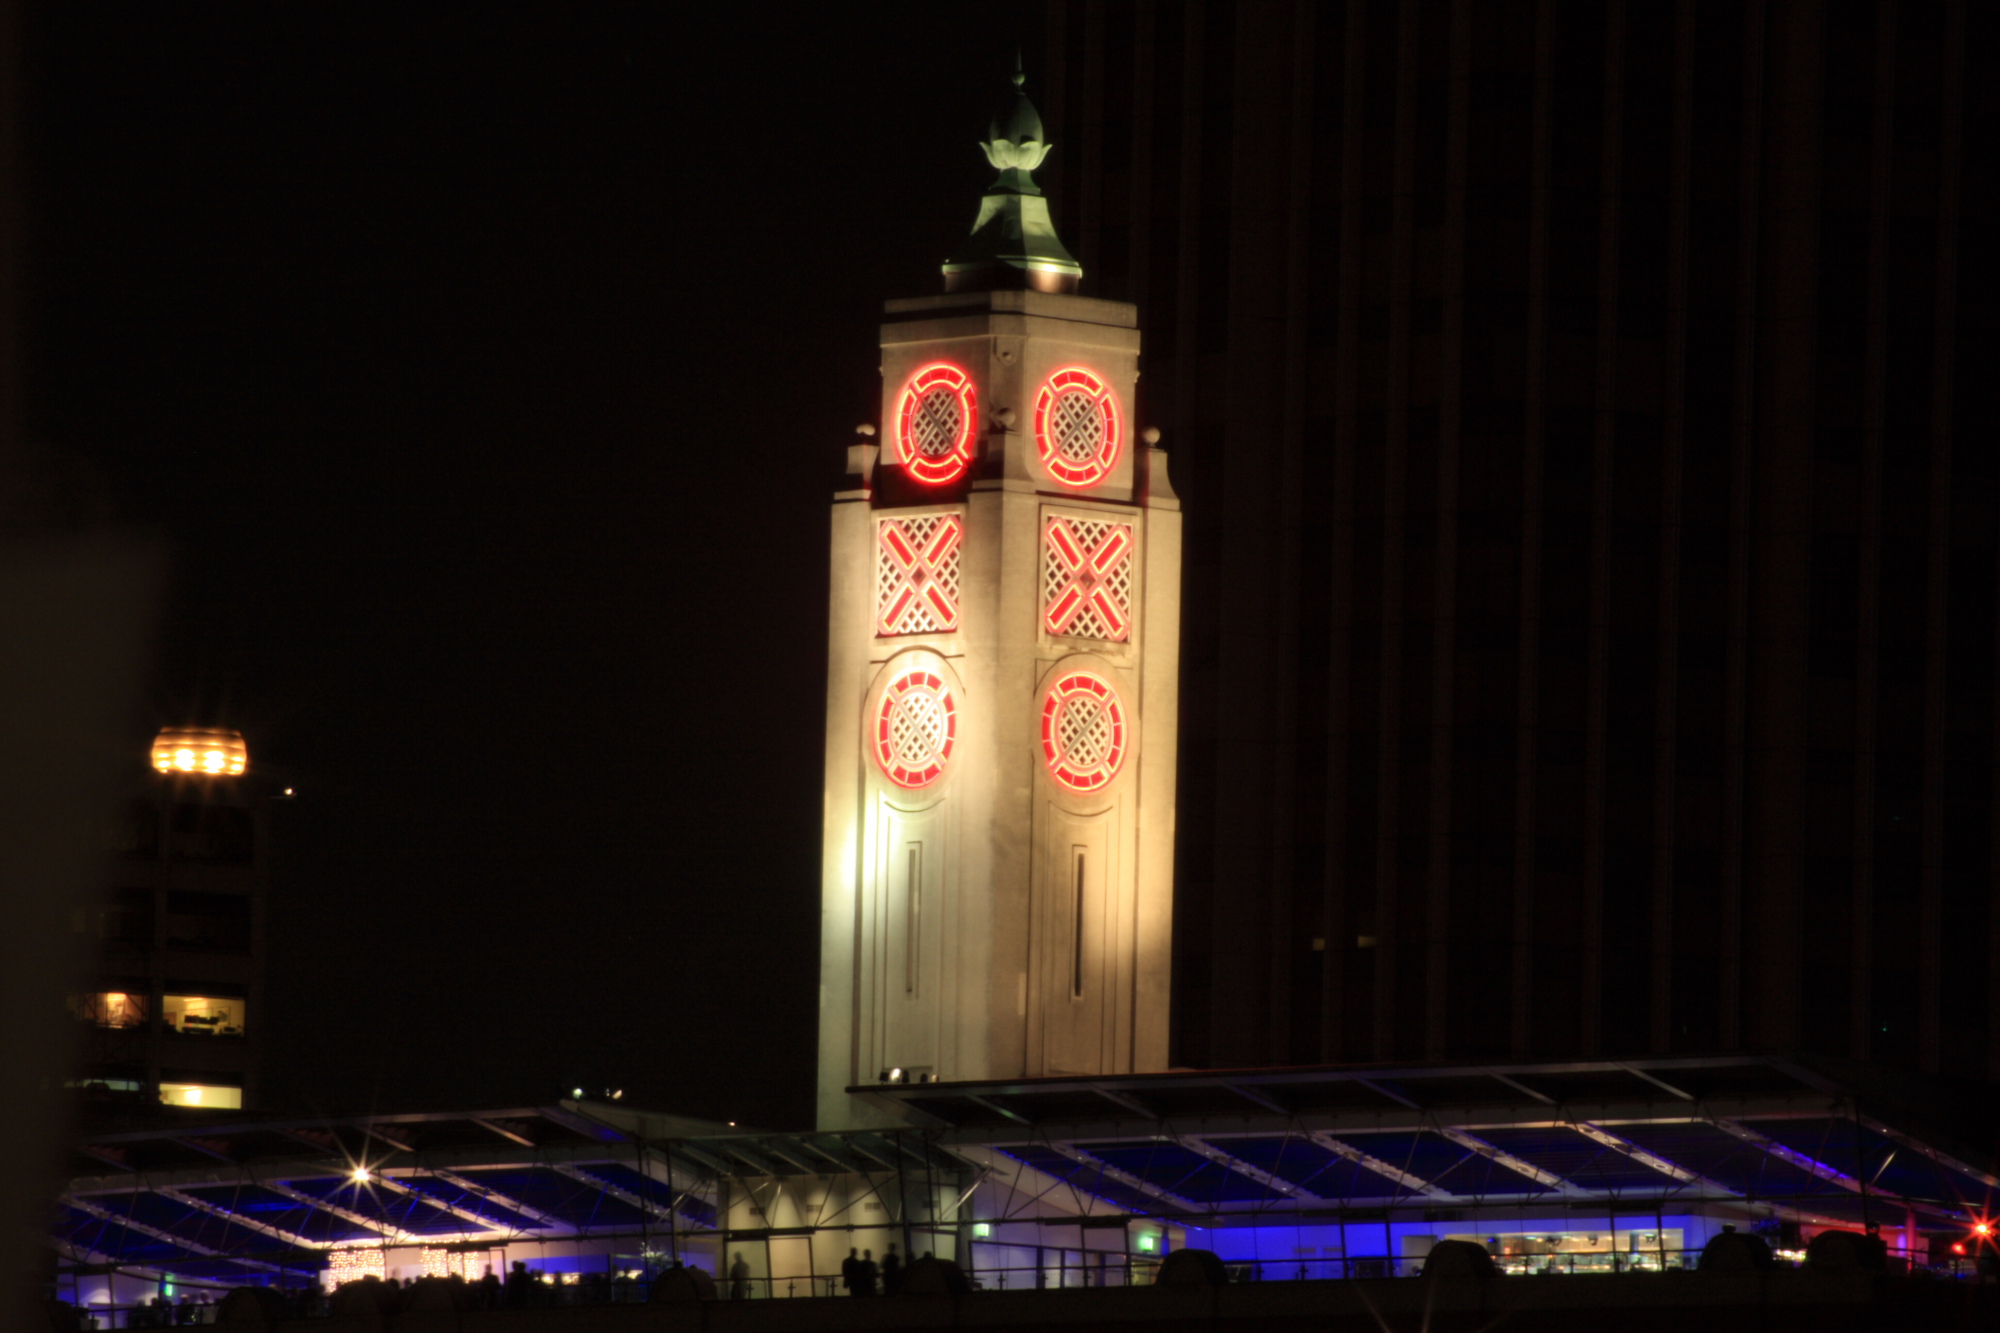 OXO tower at night.